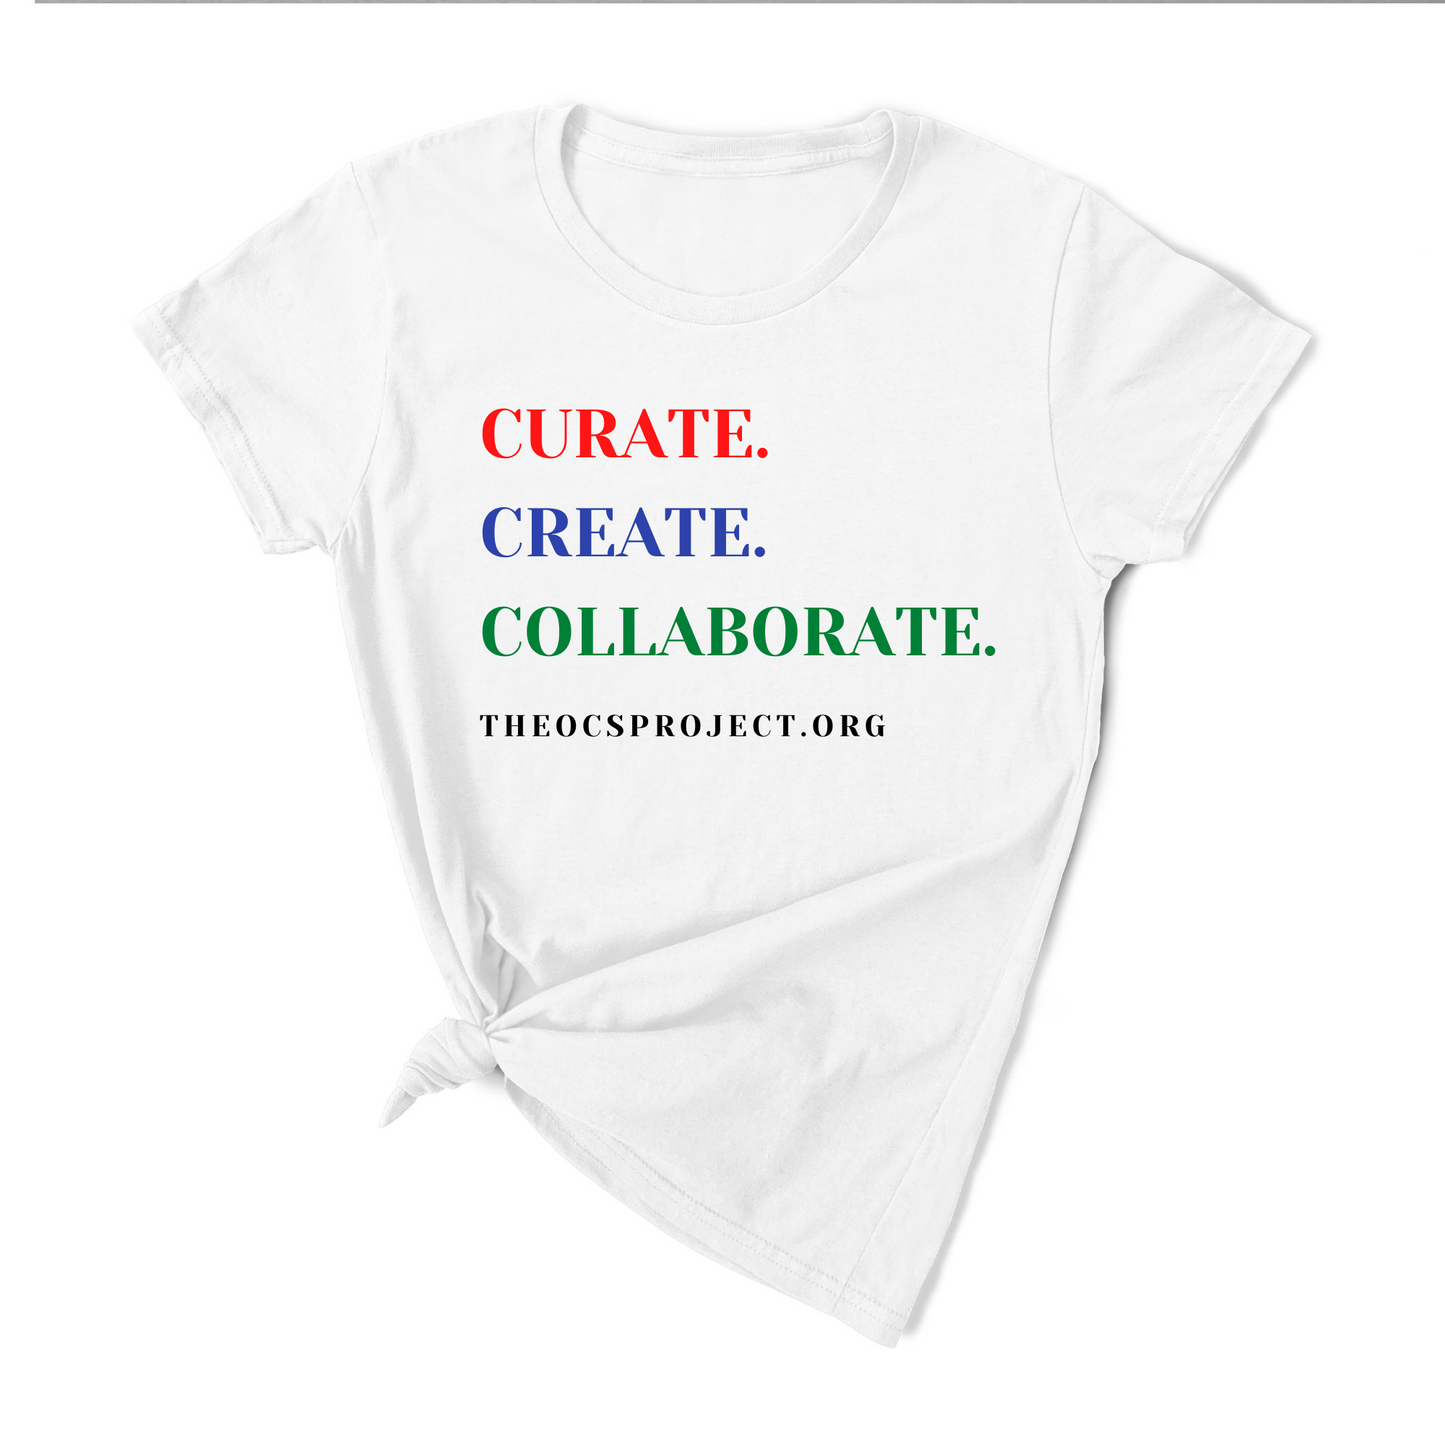 OCS Project Curate Create Collaborate Tshirt